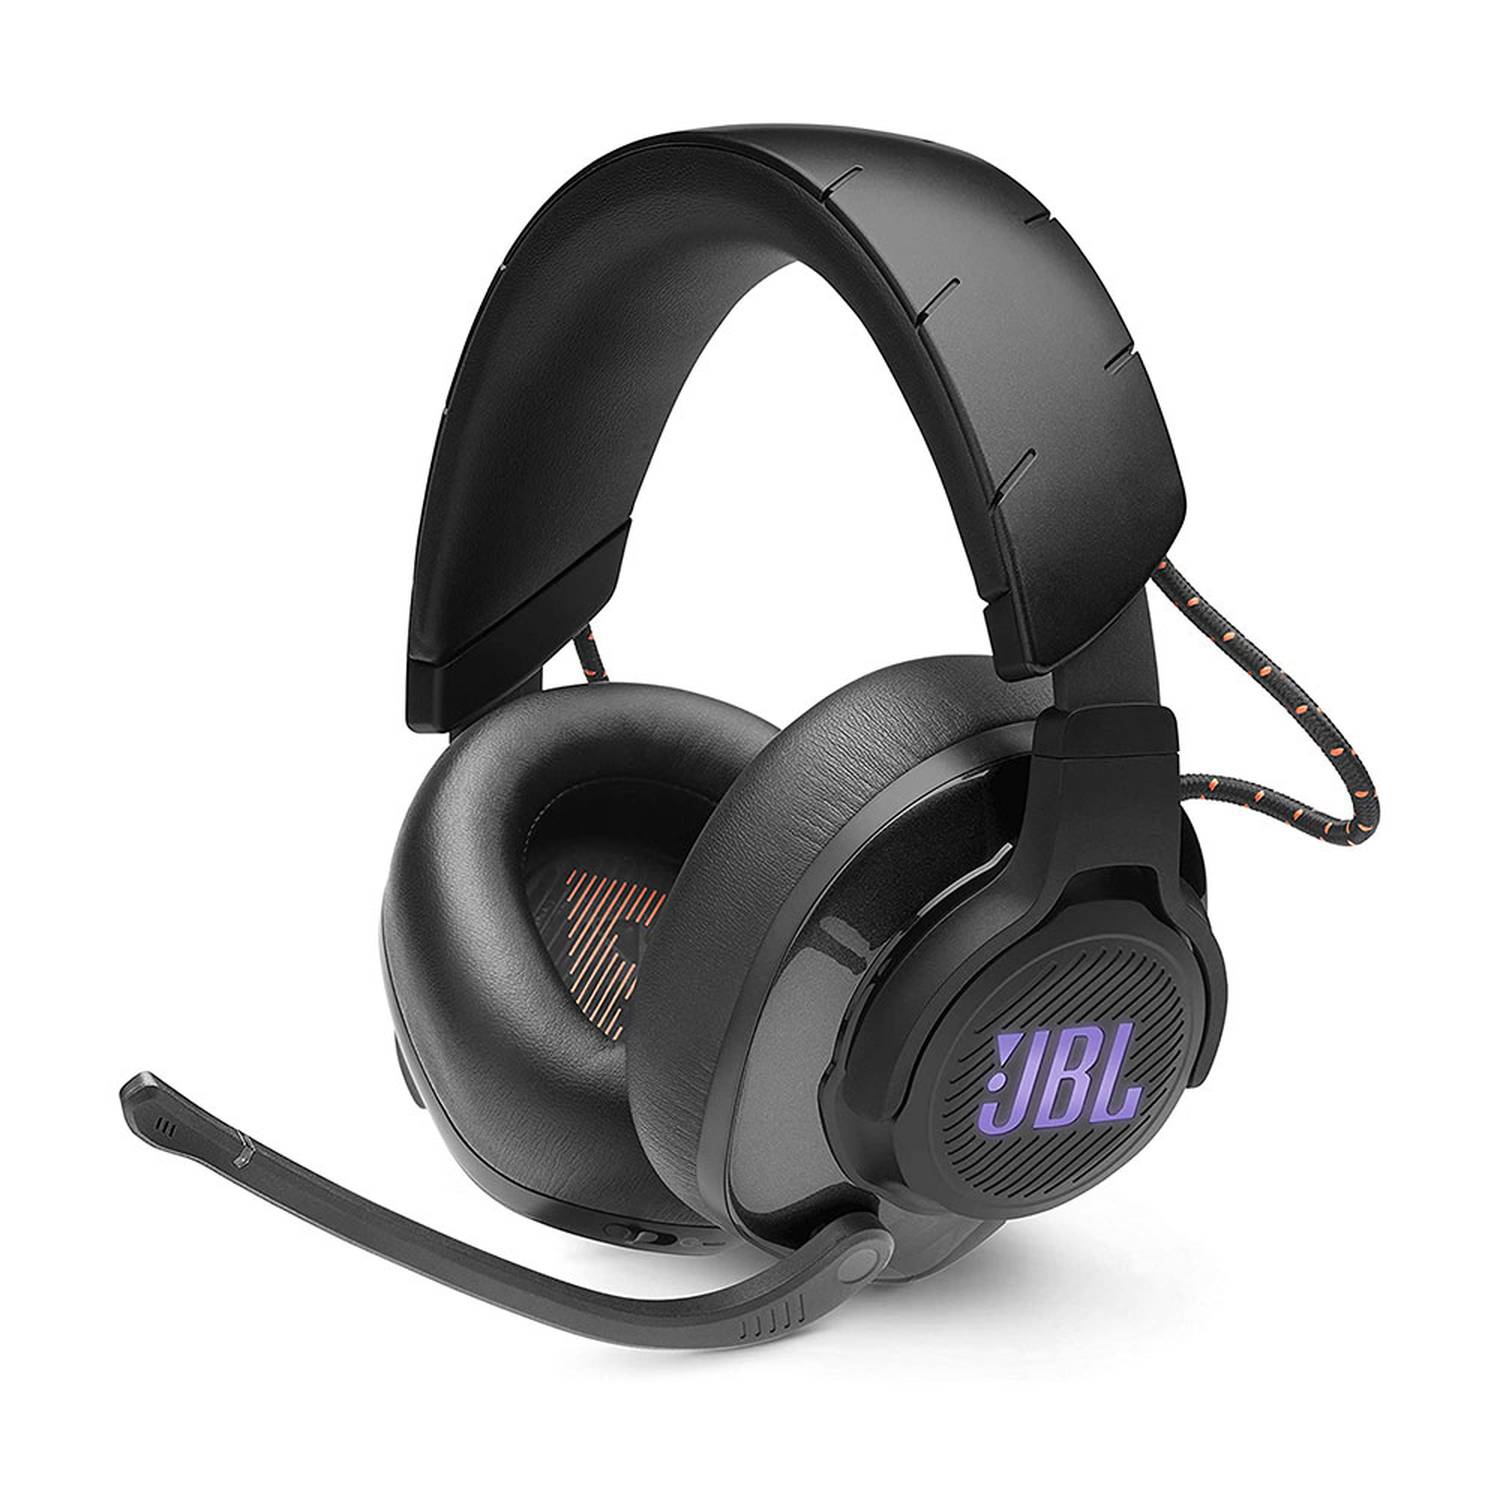 JBL Quantum 200 Wired Over-ear Gaming Headphones with Flip-up Mic, Black